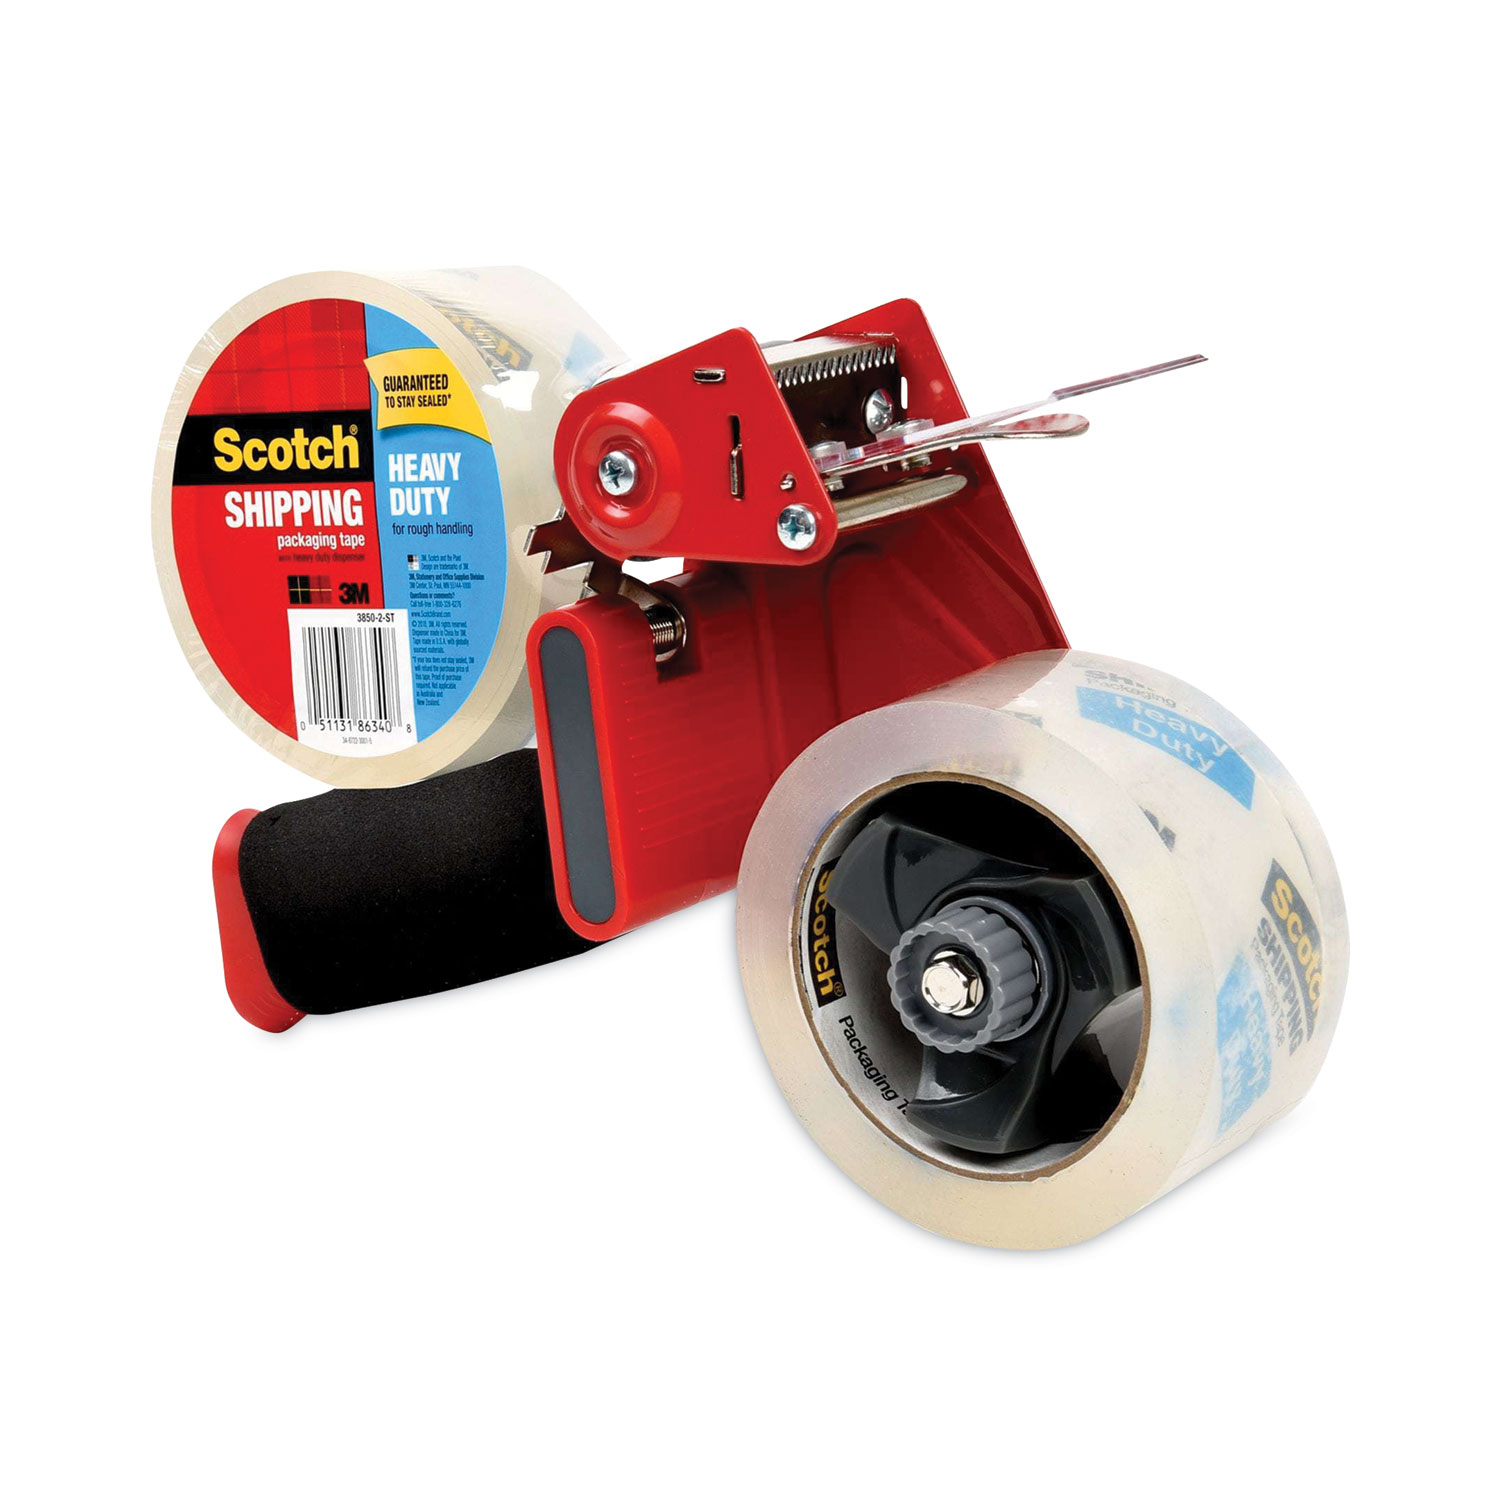 Fisherbrand Multiple-Roll Tape Dispenser For rolls with: 14 yd